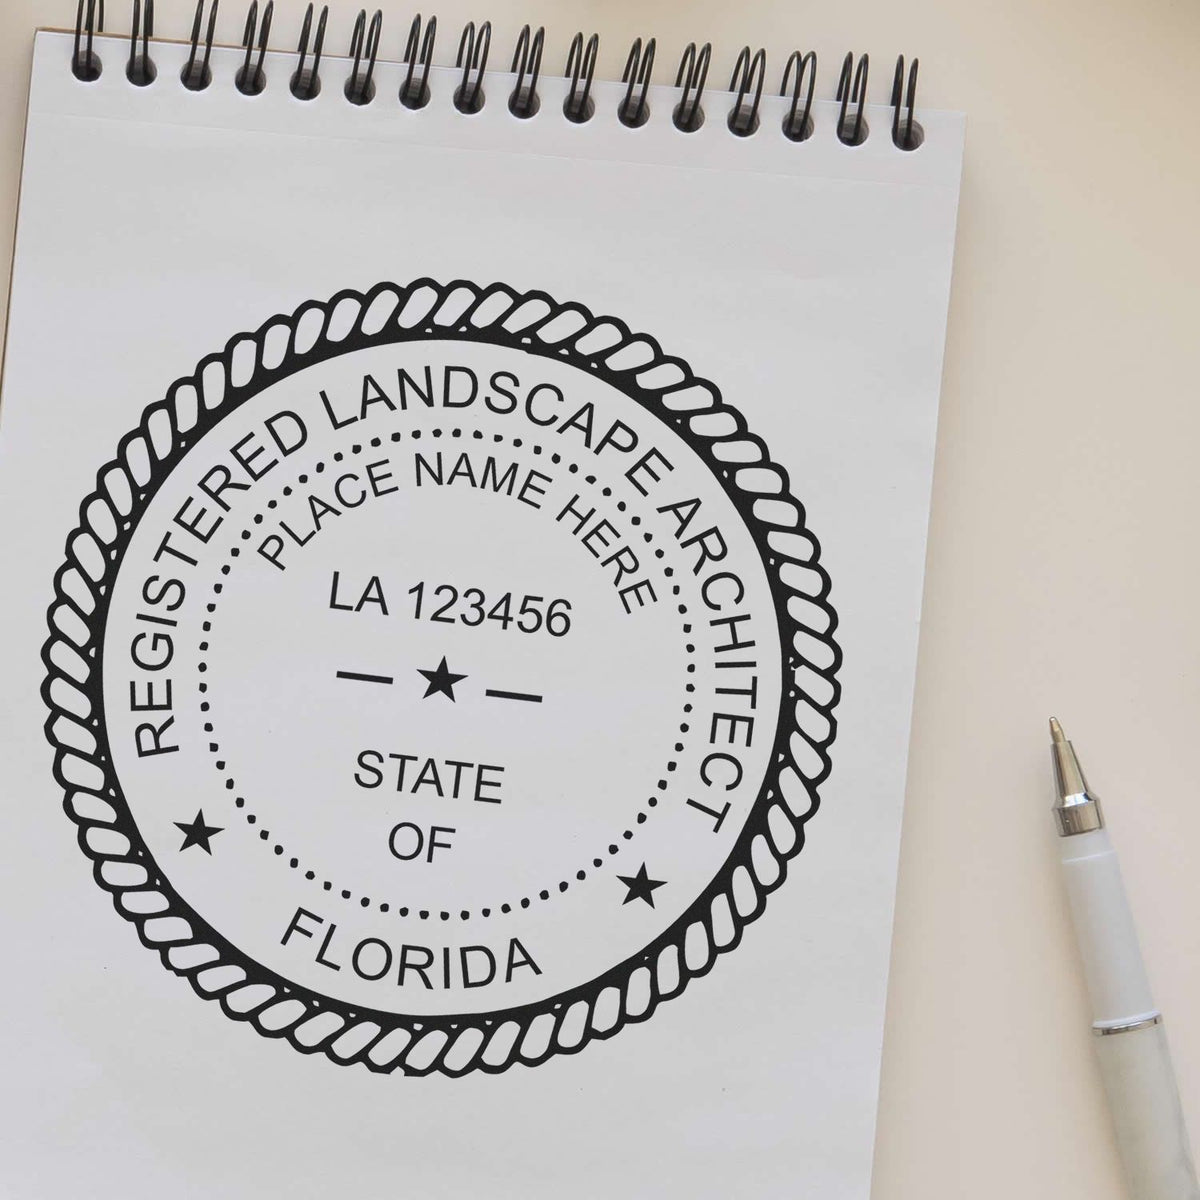 This paper is stamped with a sample imprint of the Slim Pre-Inked Florida Landscape Architect Seal Stamp, signifying its quality and reliability.